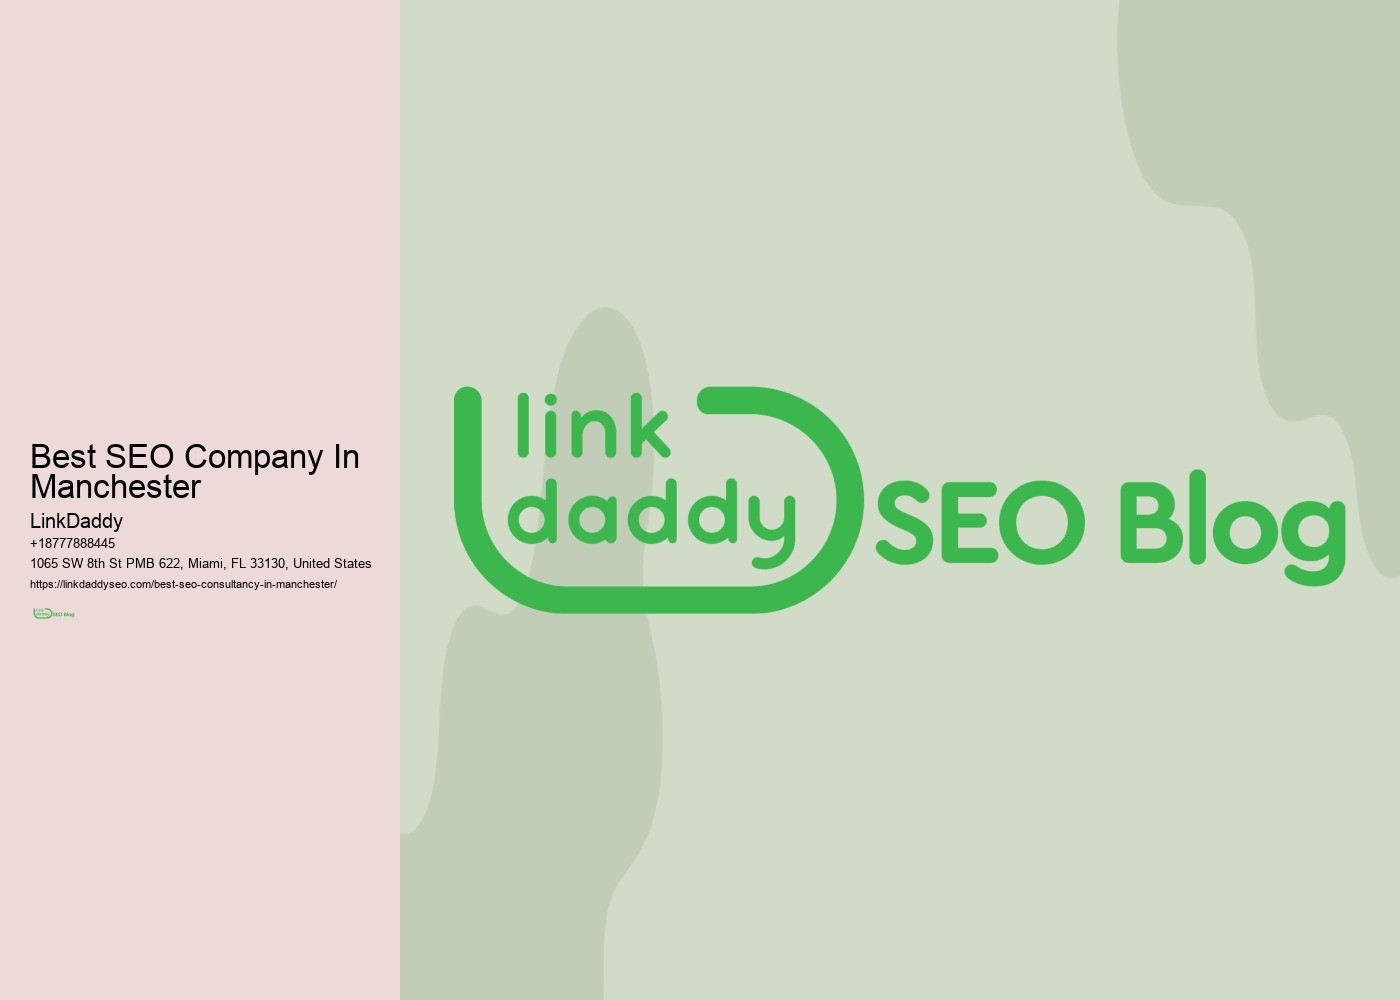 Best SEO Company In Manchester